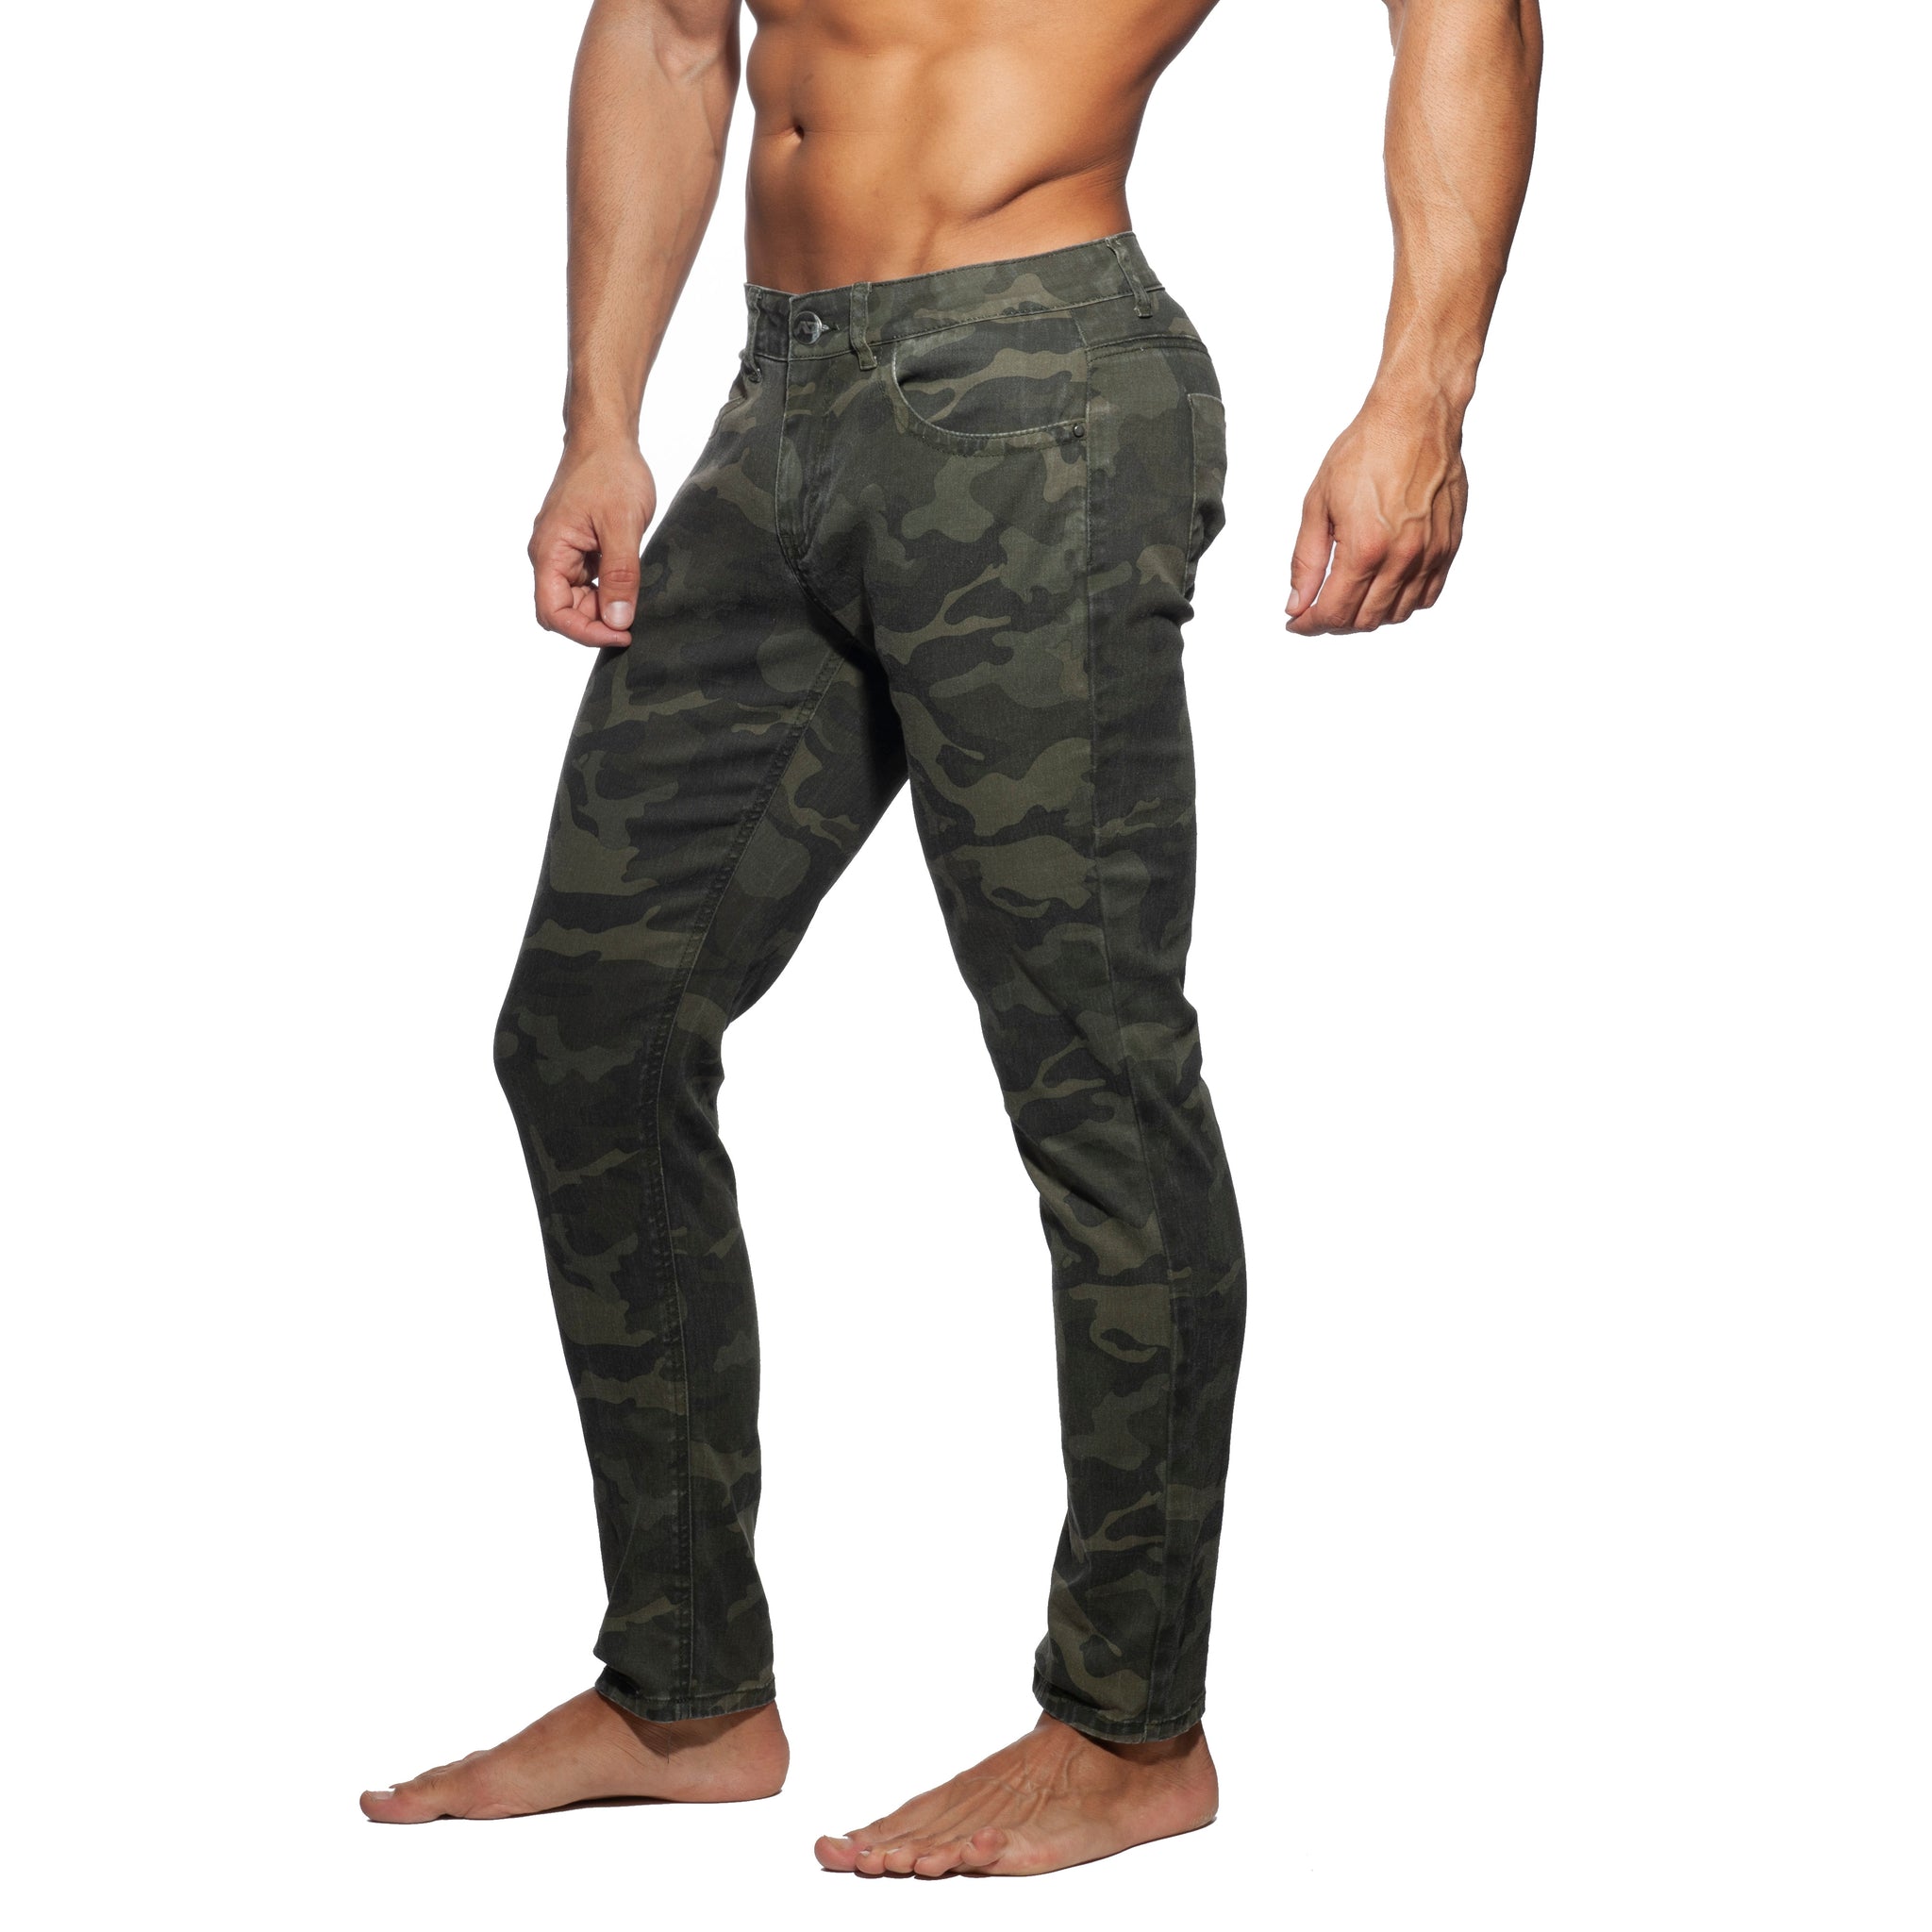 Addicted Camo Jeans Camouflage AD837